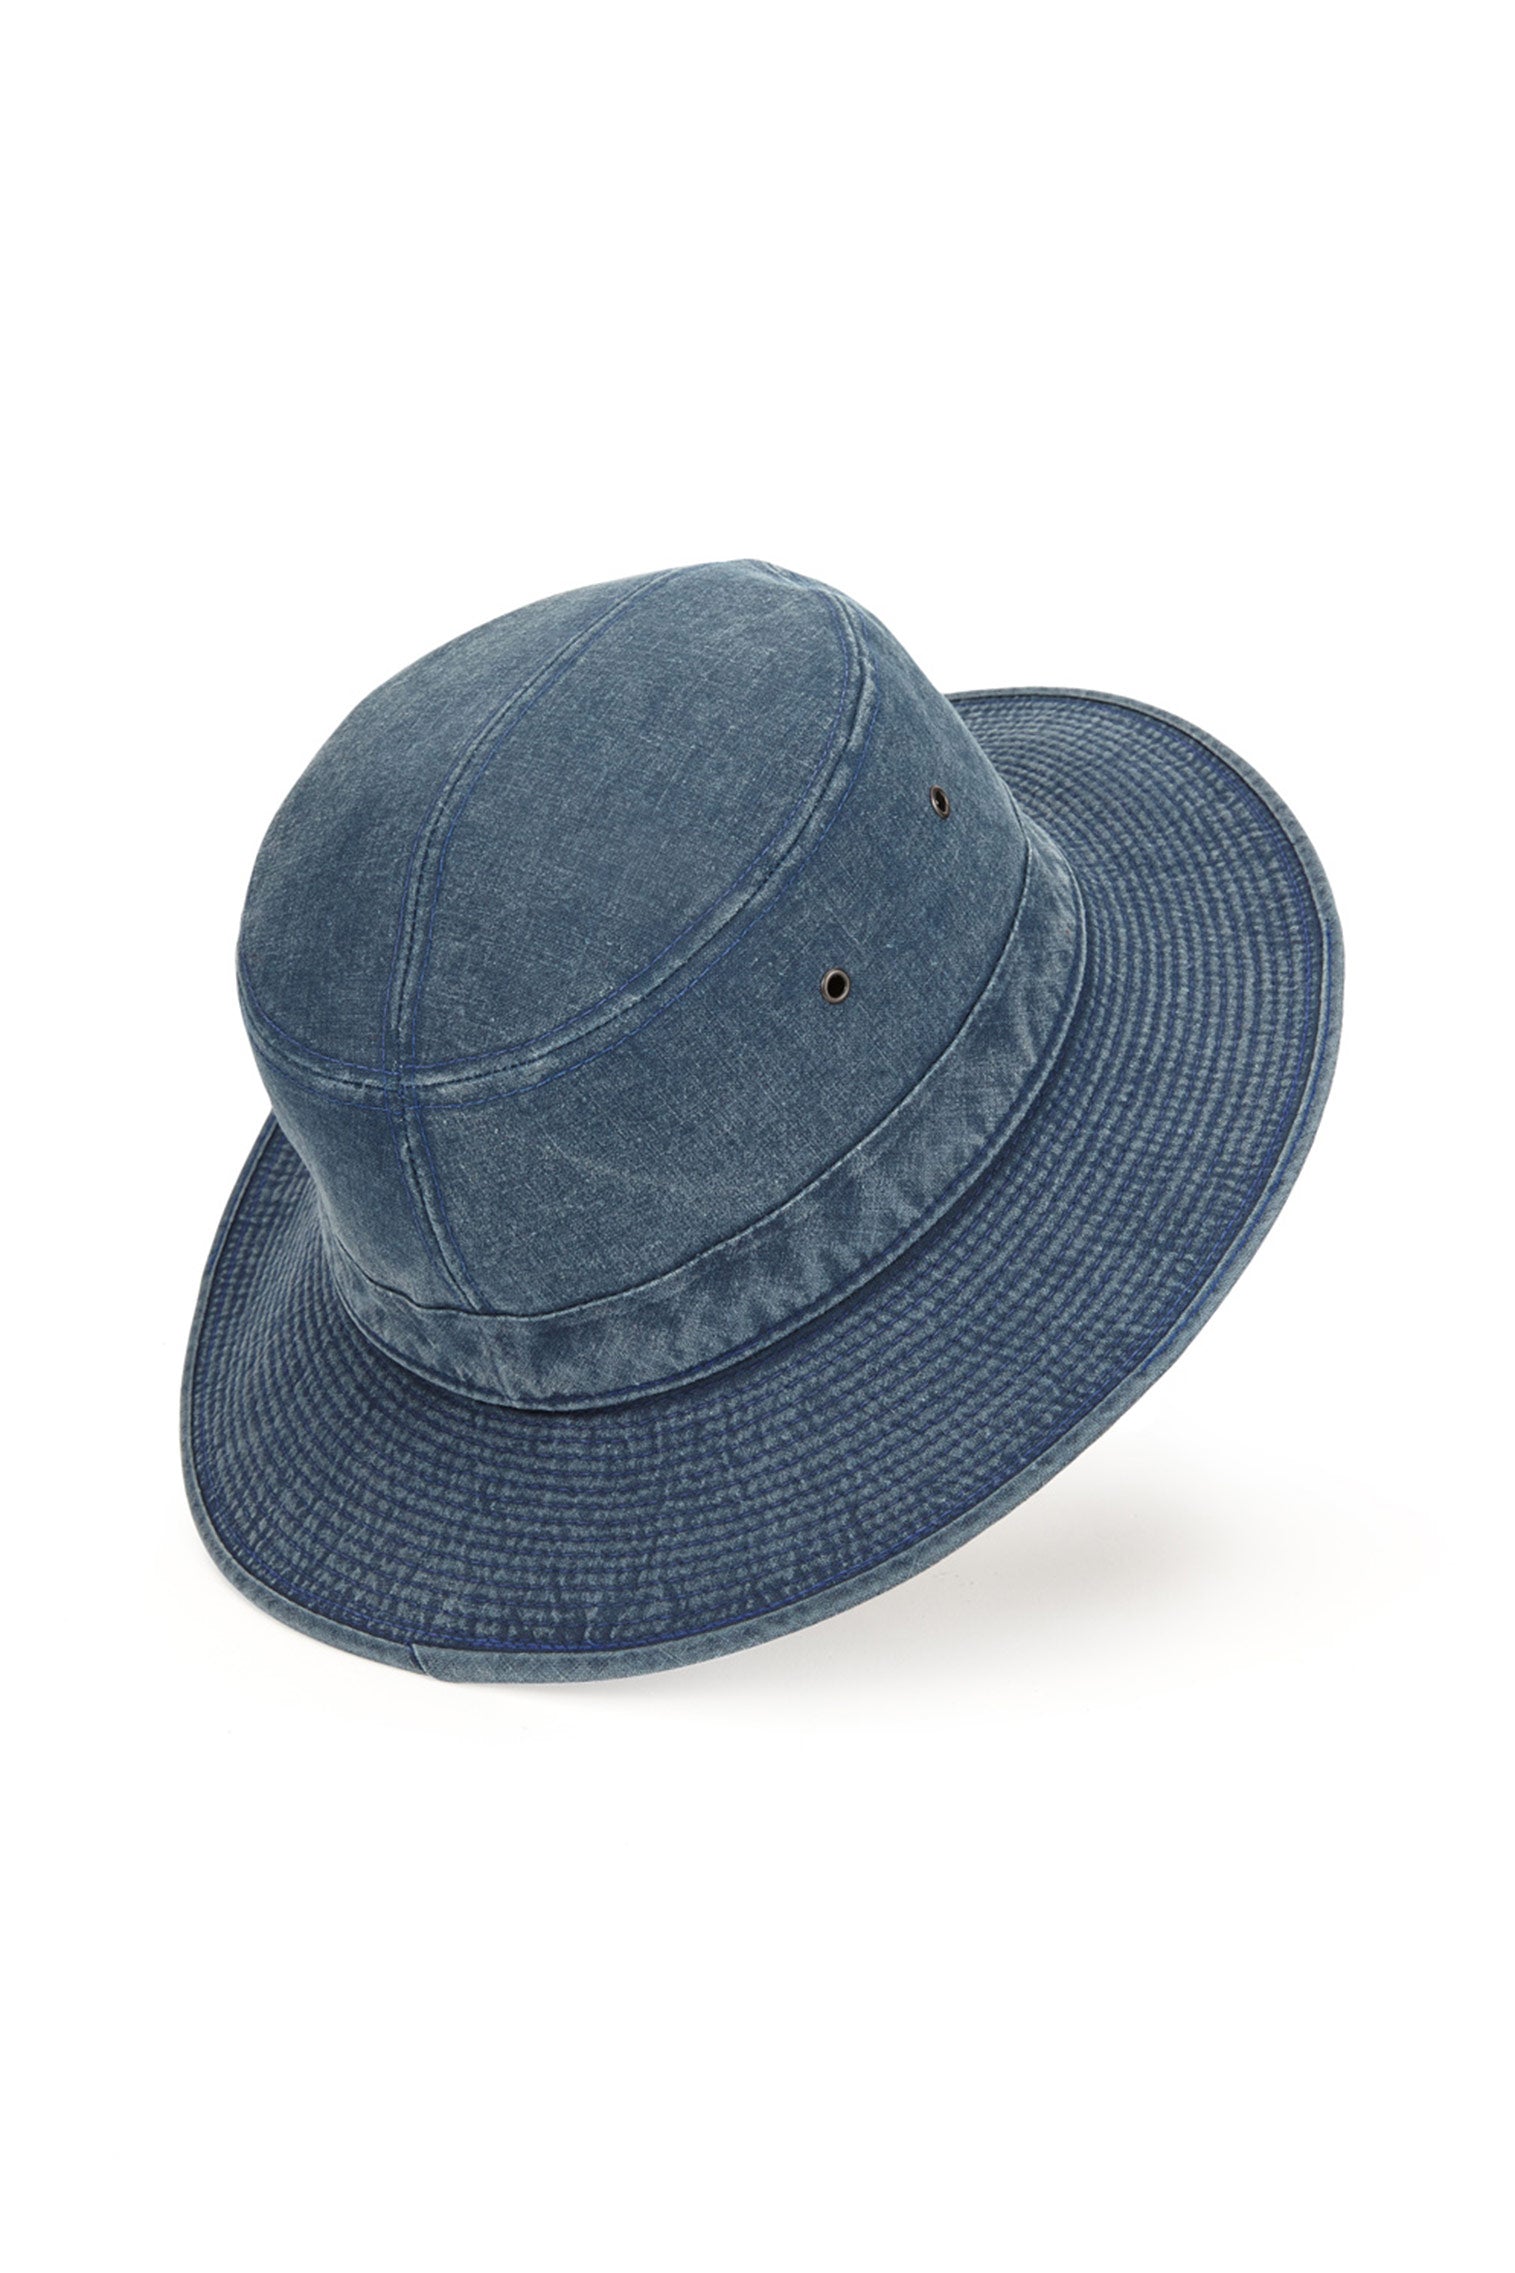 Capri Rollable Hat - Hats for Tall People - Lock & Co. Hatters London UK